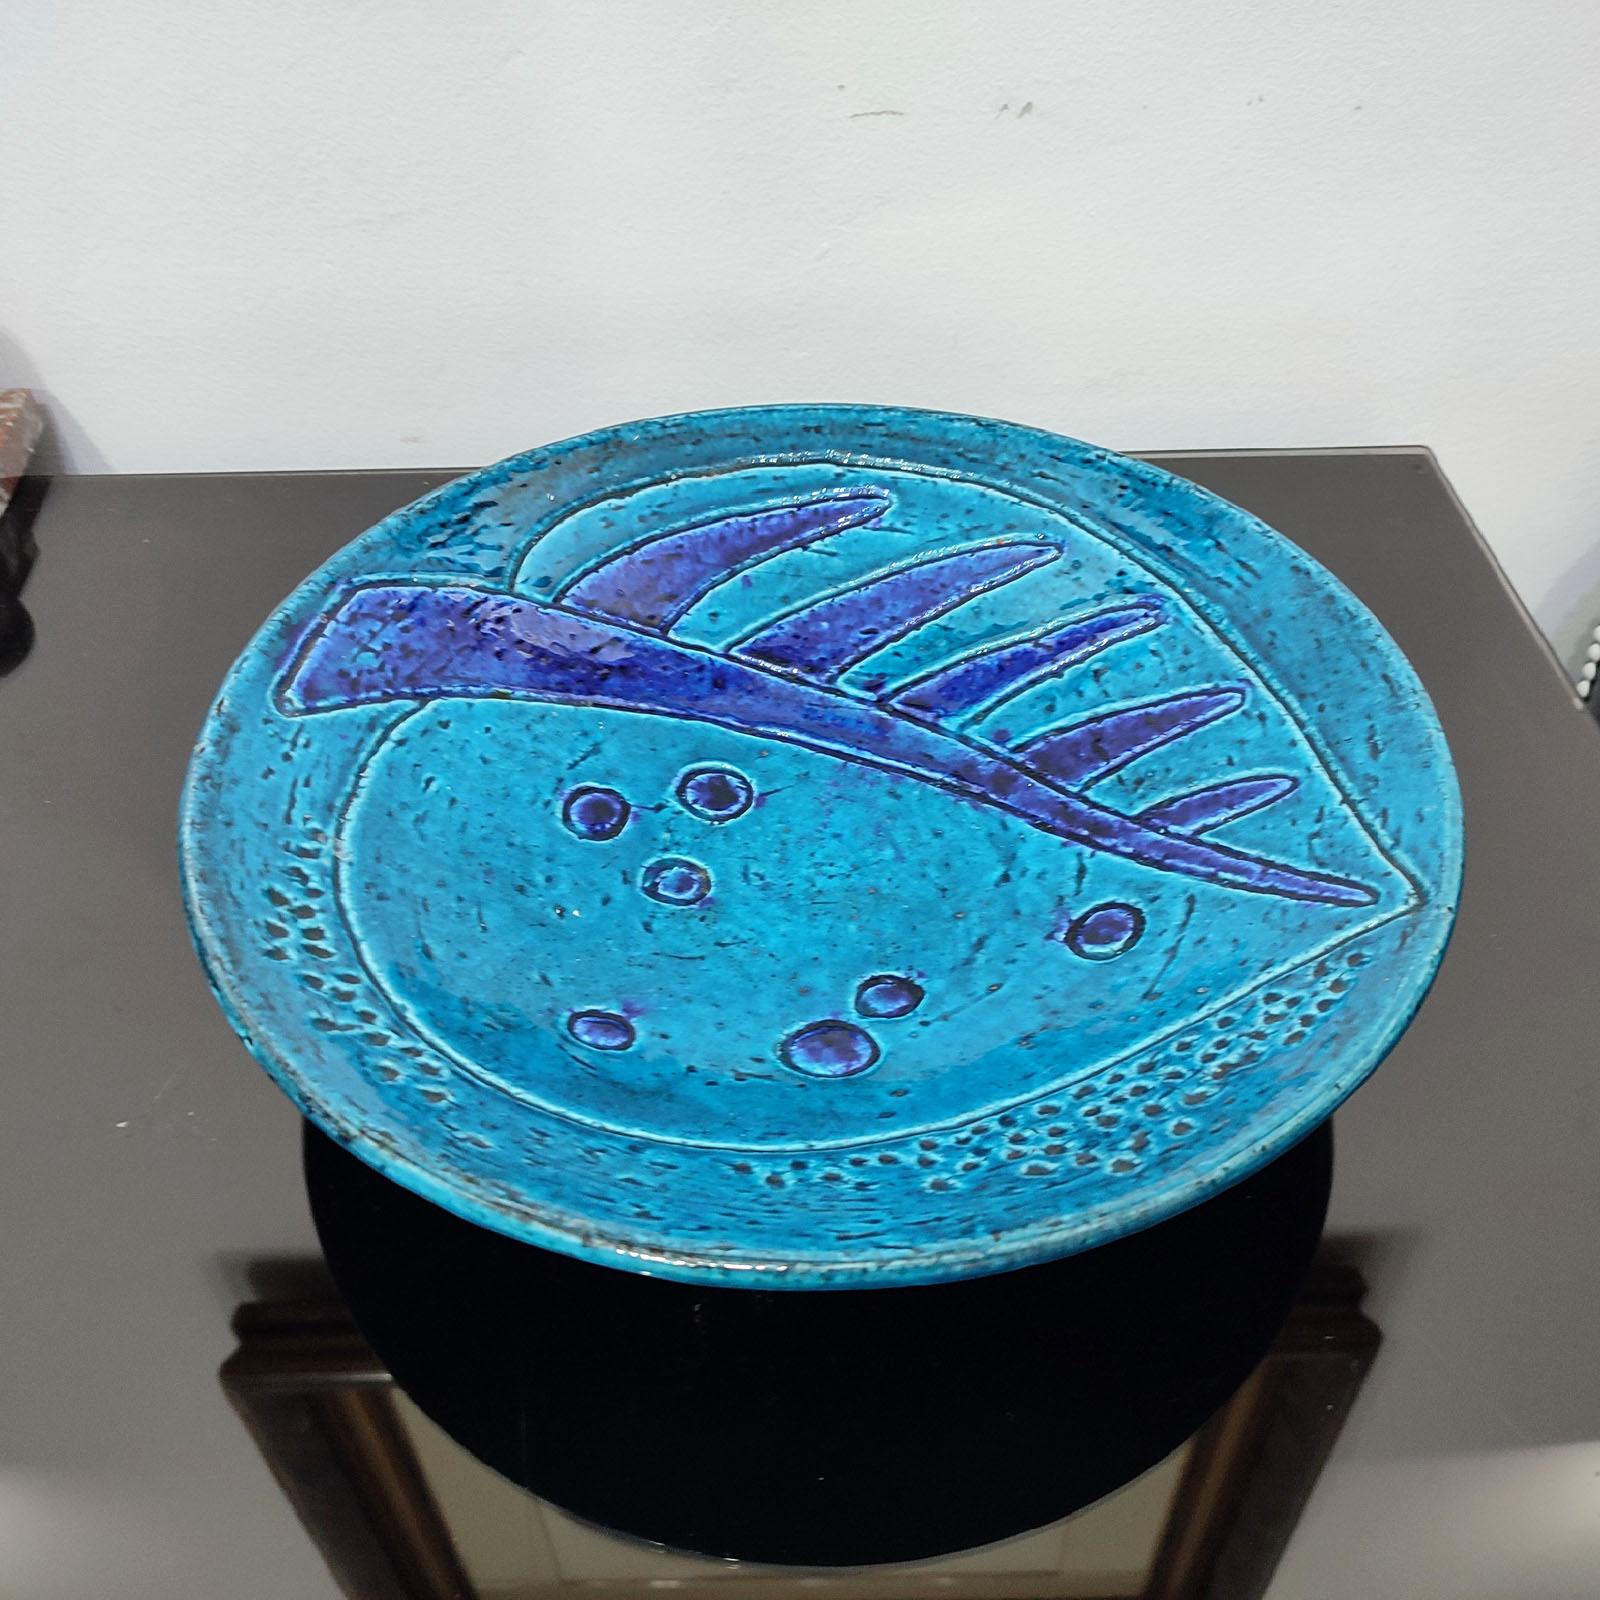 A large chamotte stoneware bowl (plate) by Swedish designer Charlotte Hamilton (1883-1980) produced by Rörstrand 1946-49. 
Decorated with a large leaf, in contrast tones of light and dark blue.
Excellent vintage condition with minor signs of